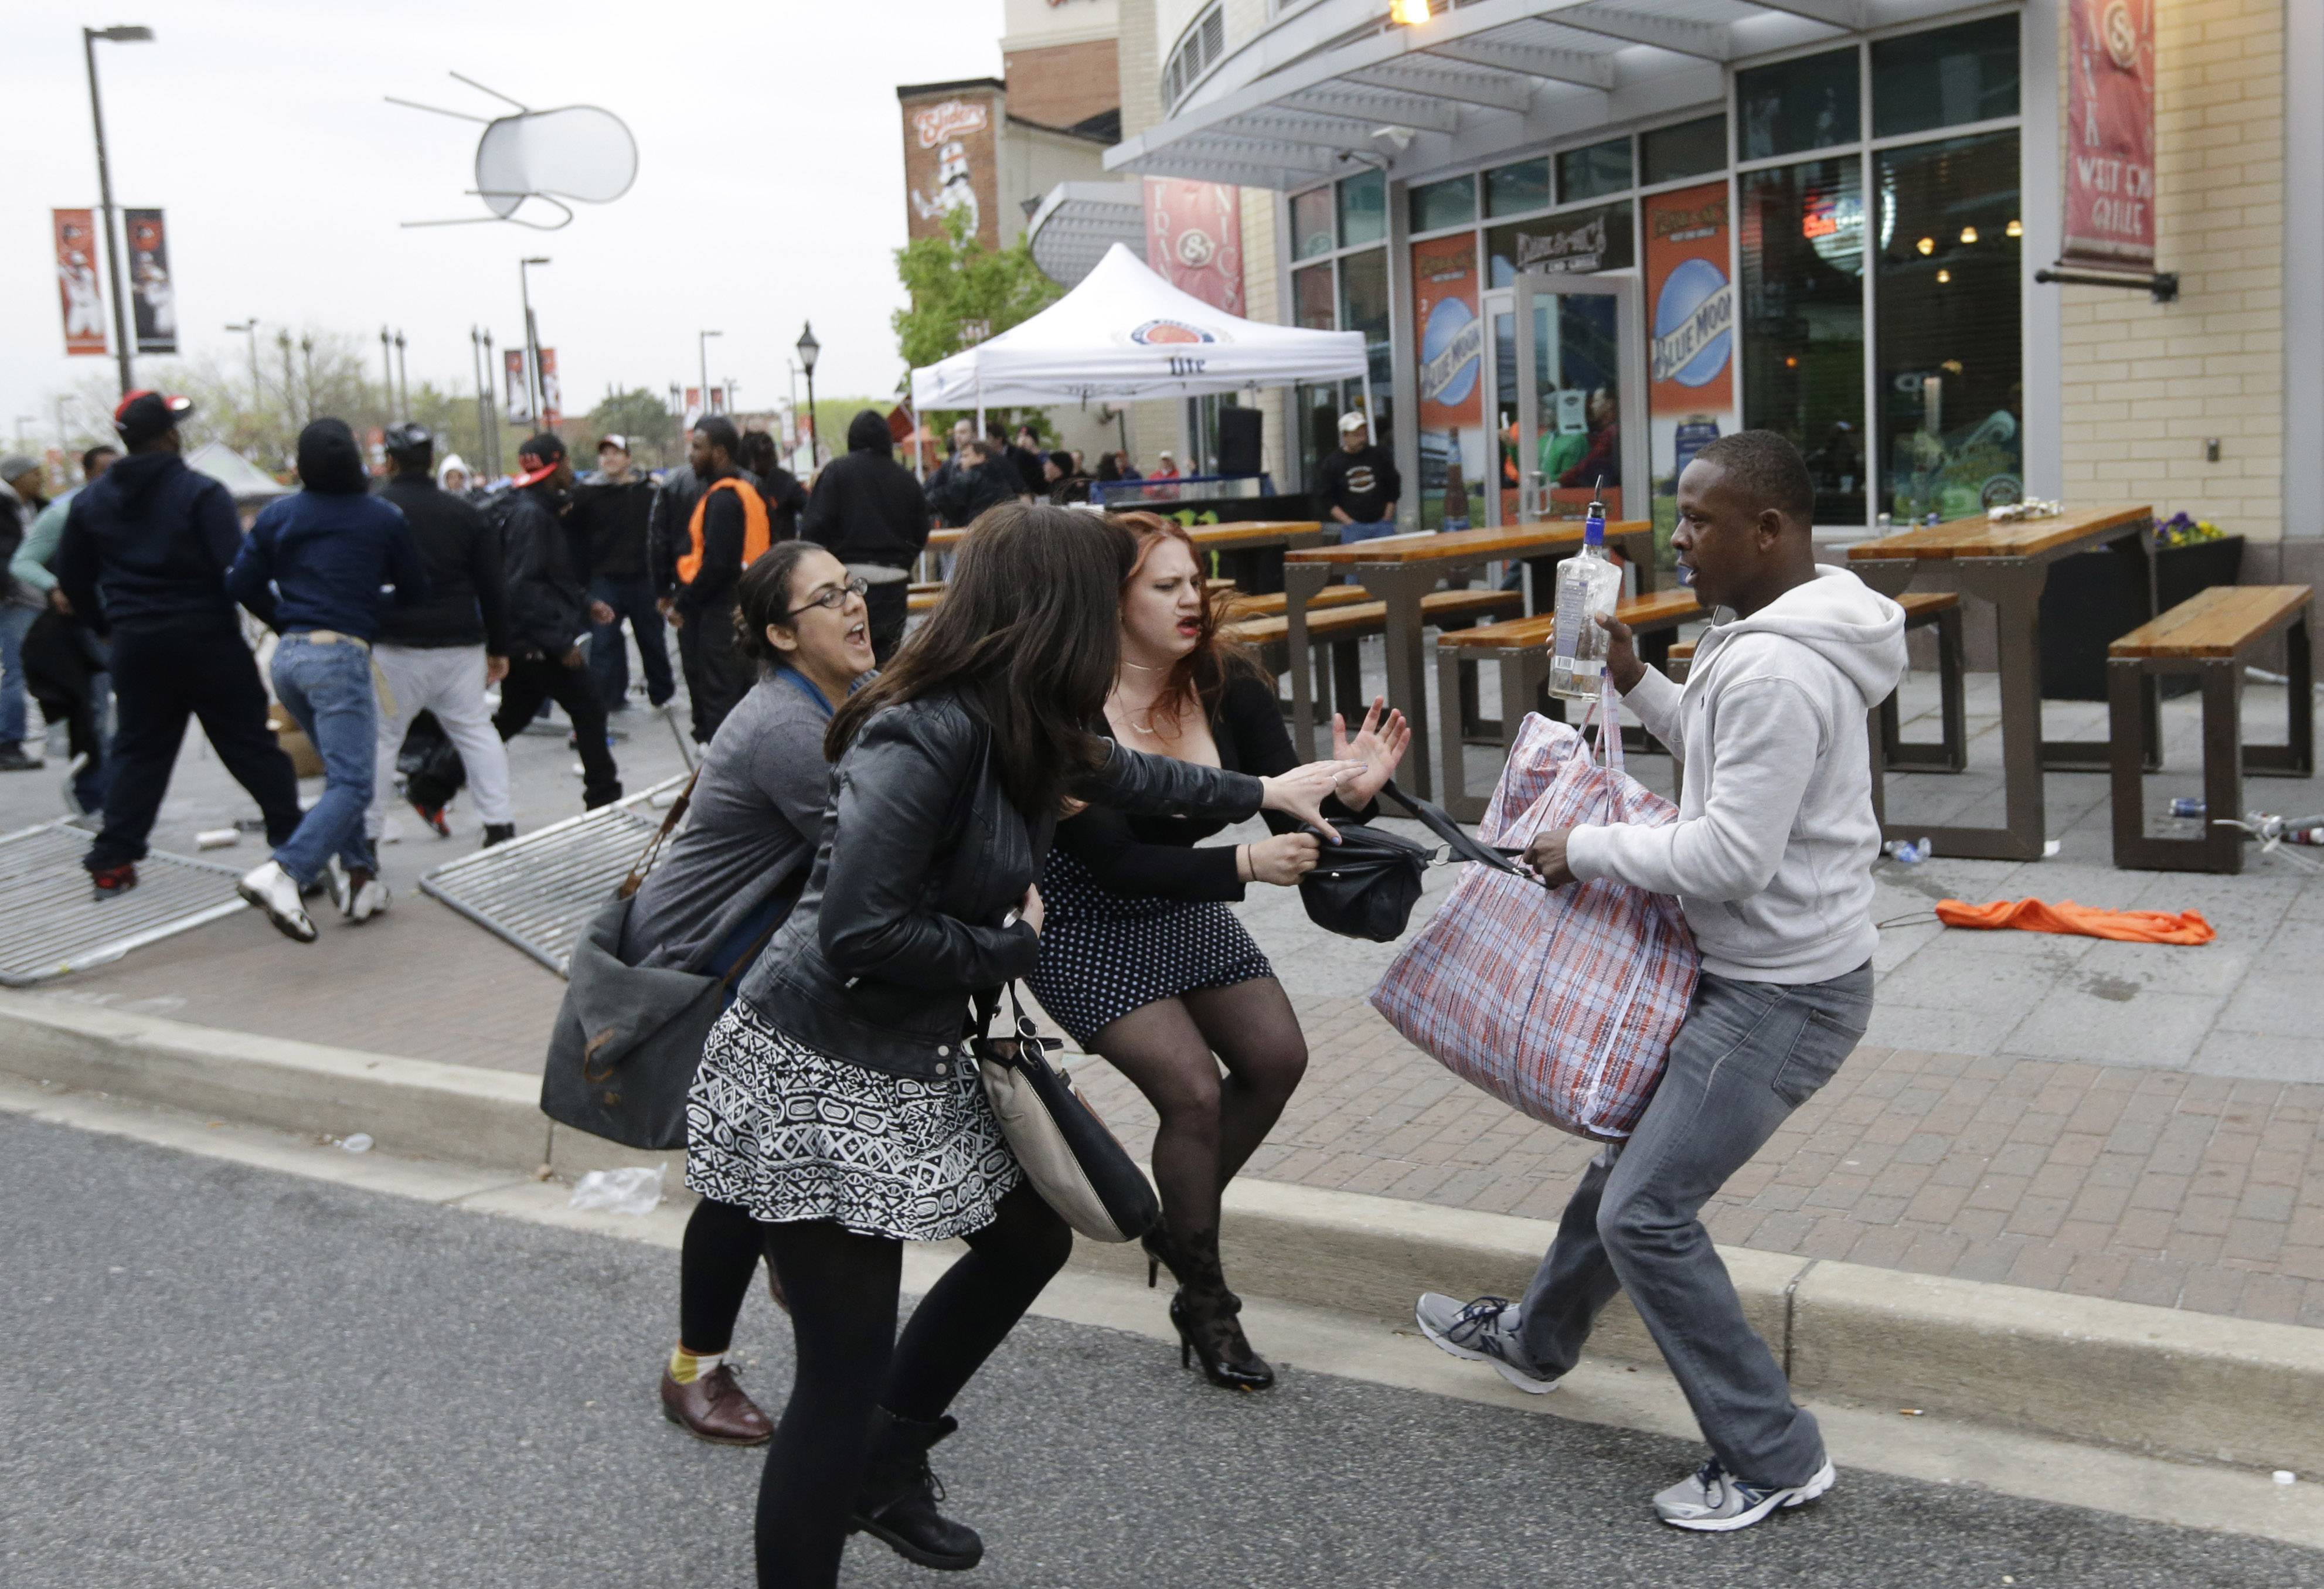 Is this a White woman stealing a purse from a noble Black non-violent prote...